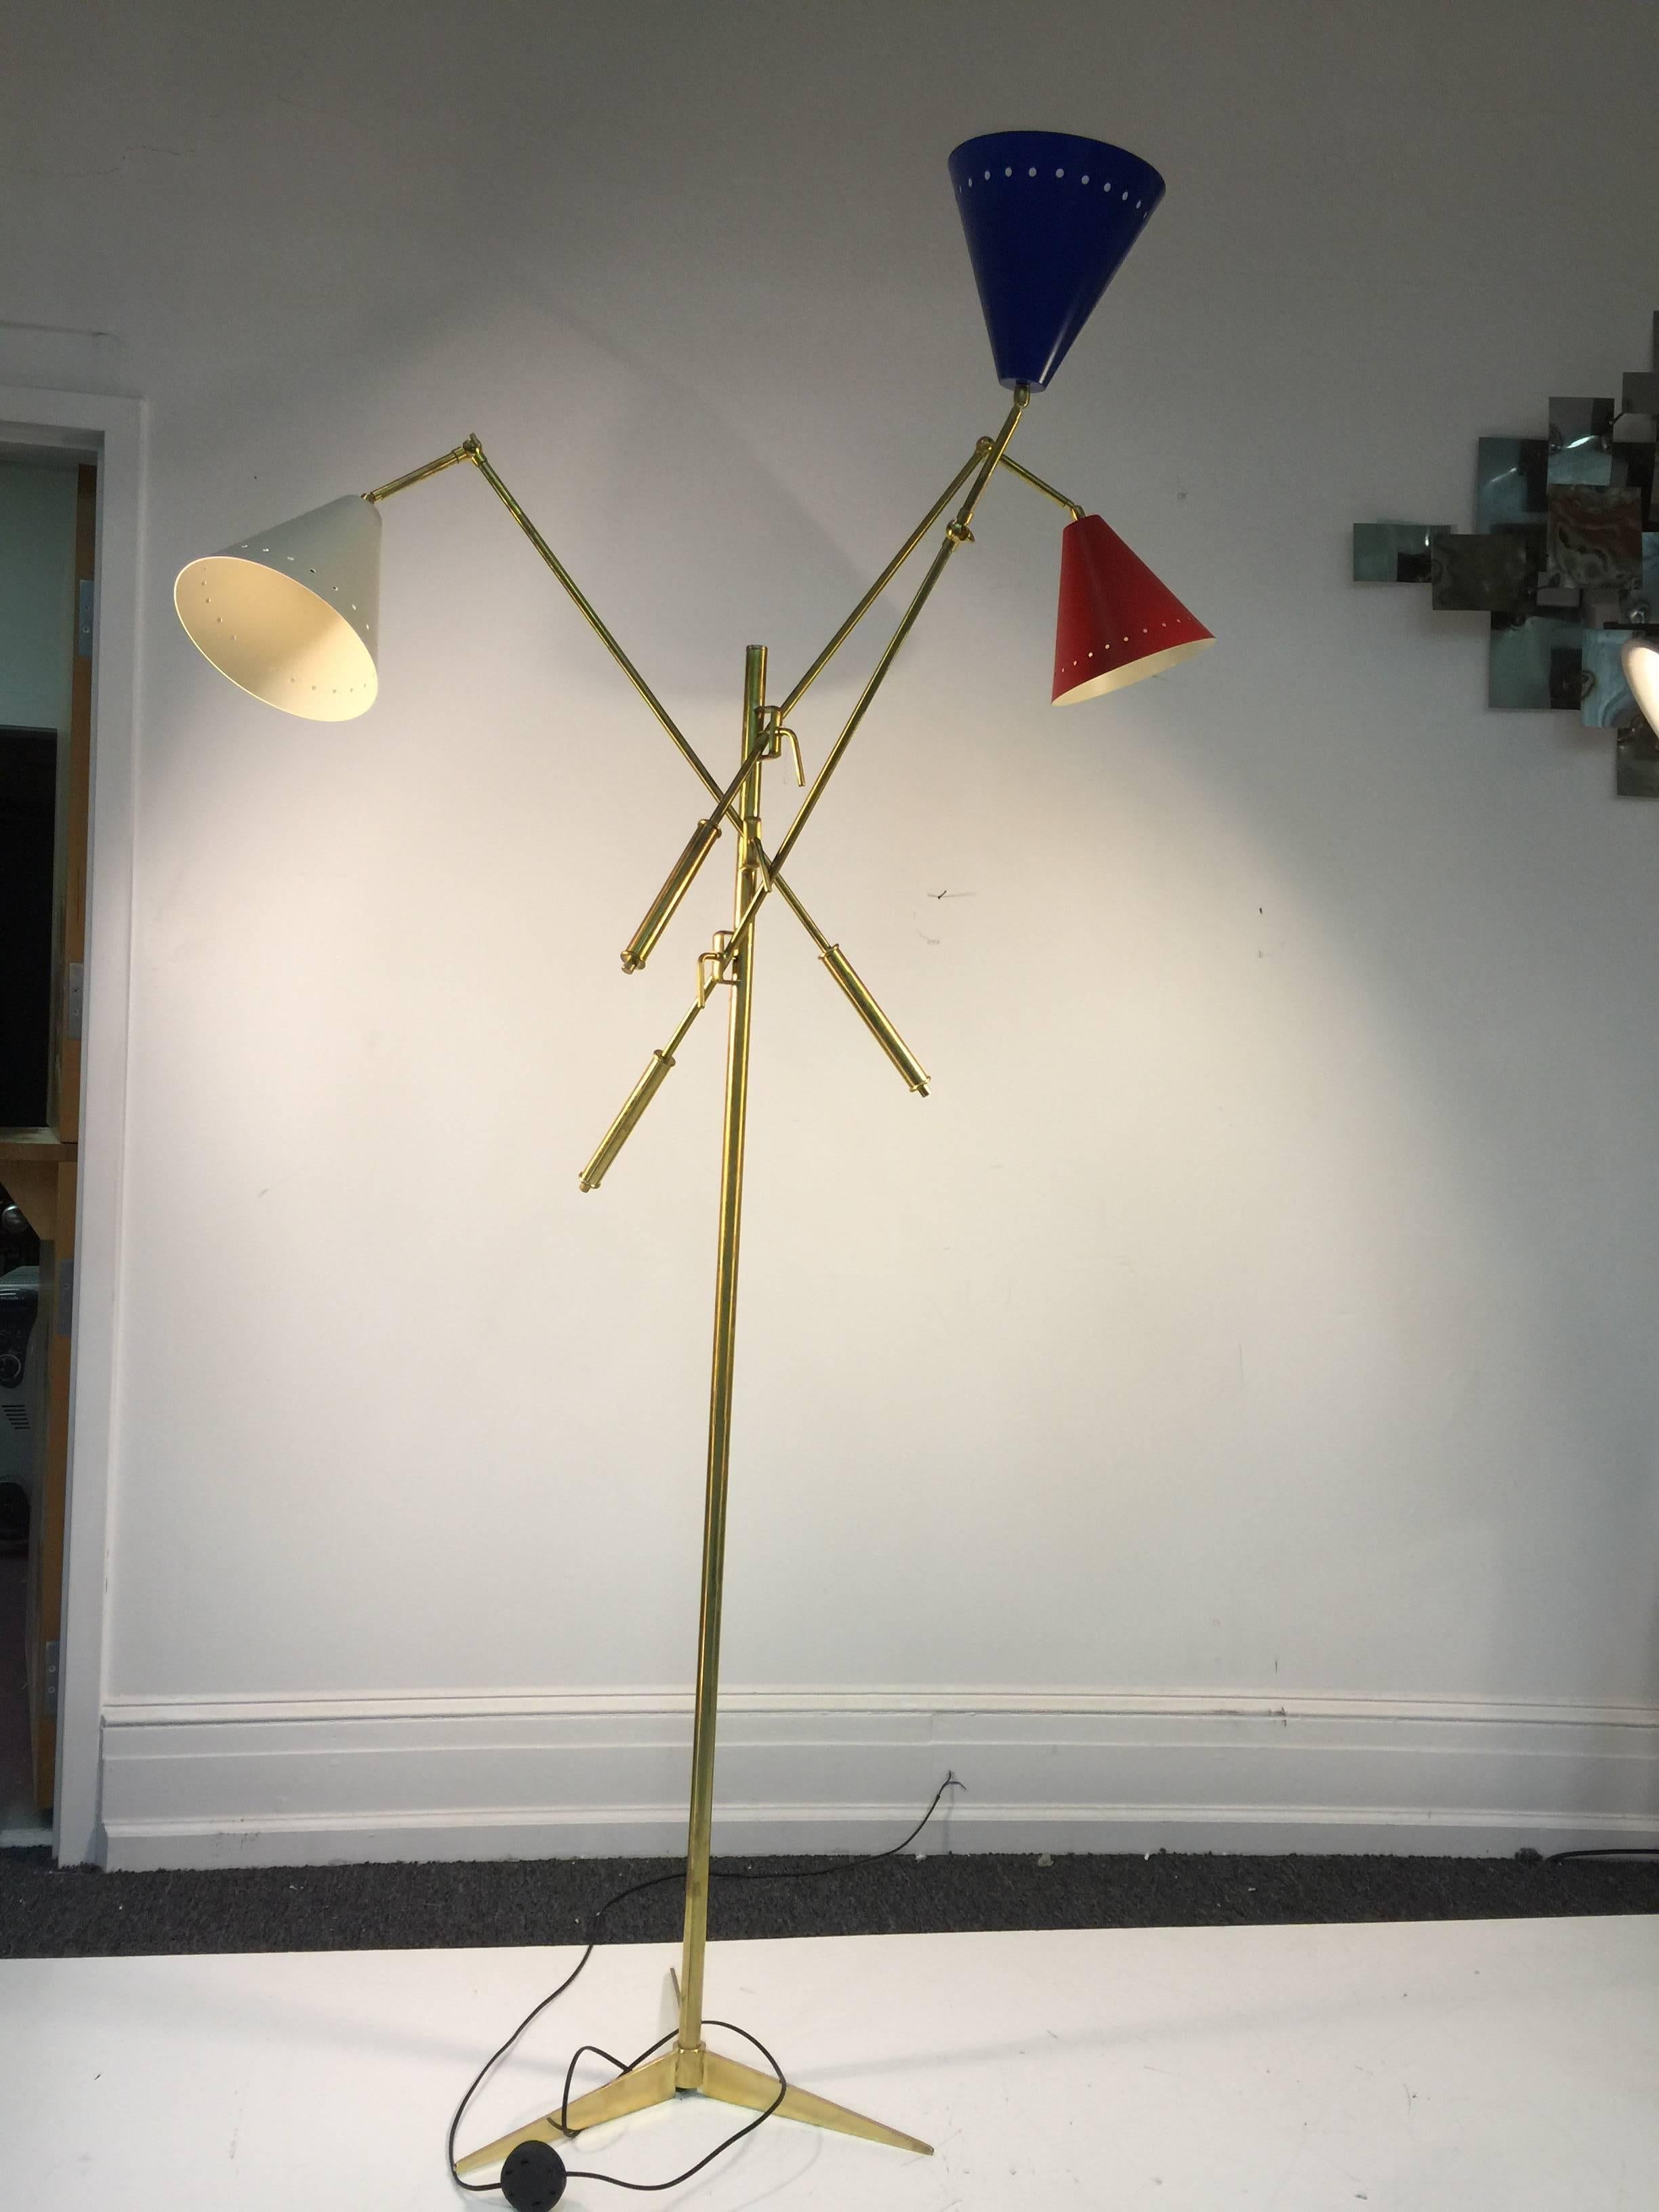 Terrific Triennale brass floor lamp on a tripod base with red, white, and blue shades designed after the Italian Lamp Master Arredoluce.